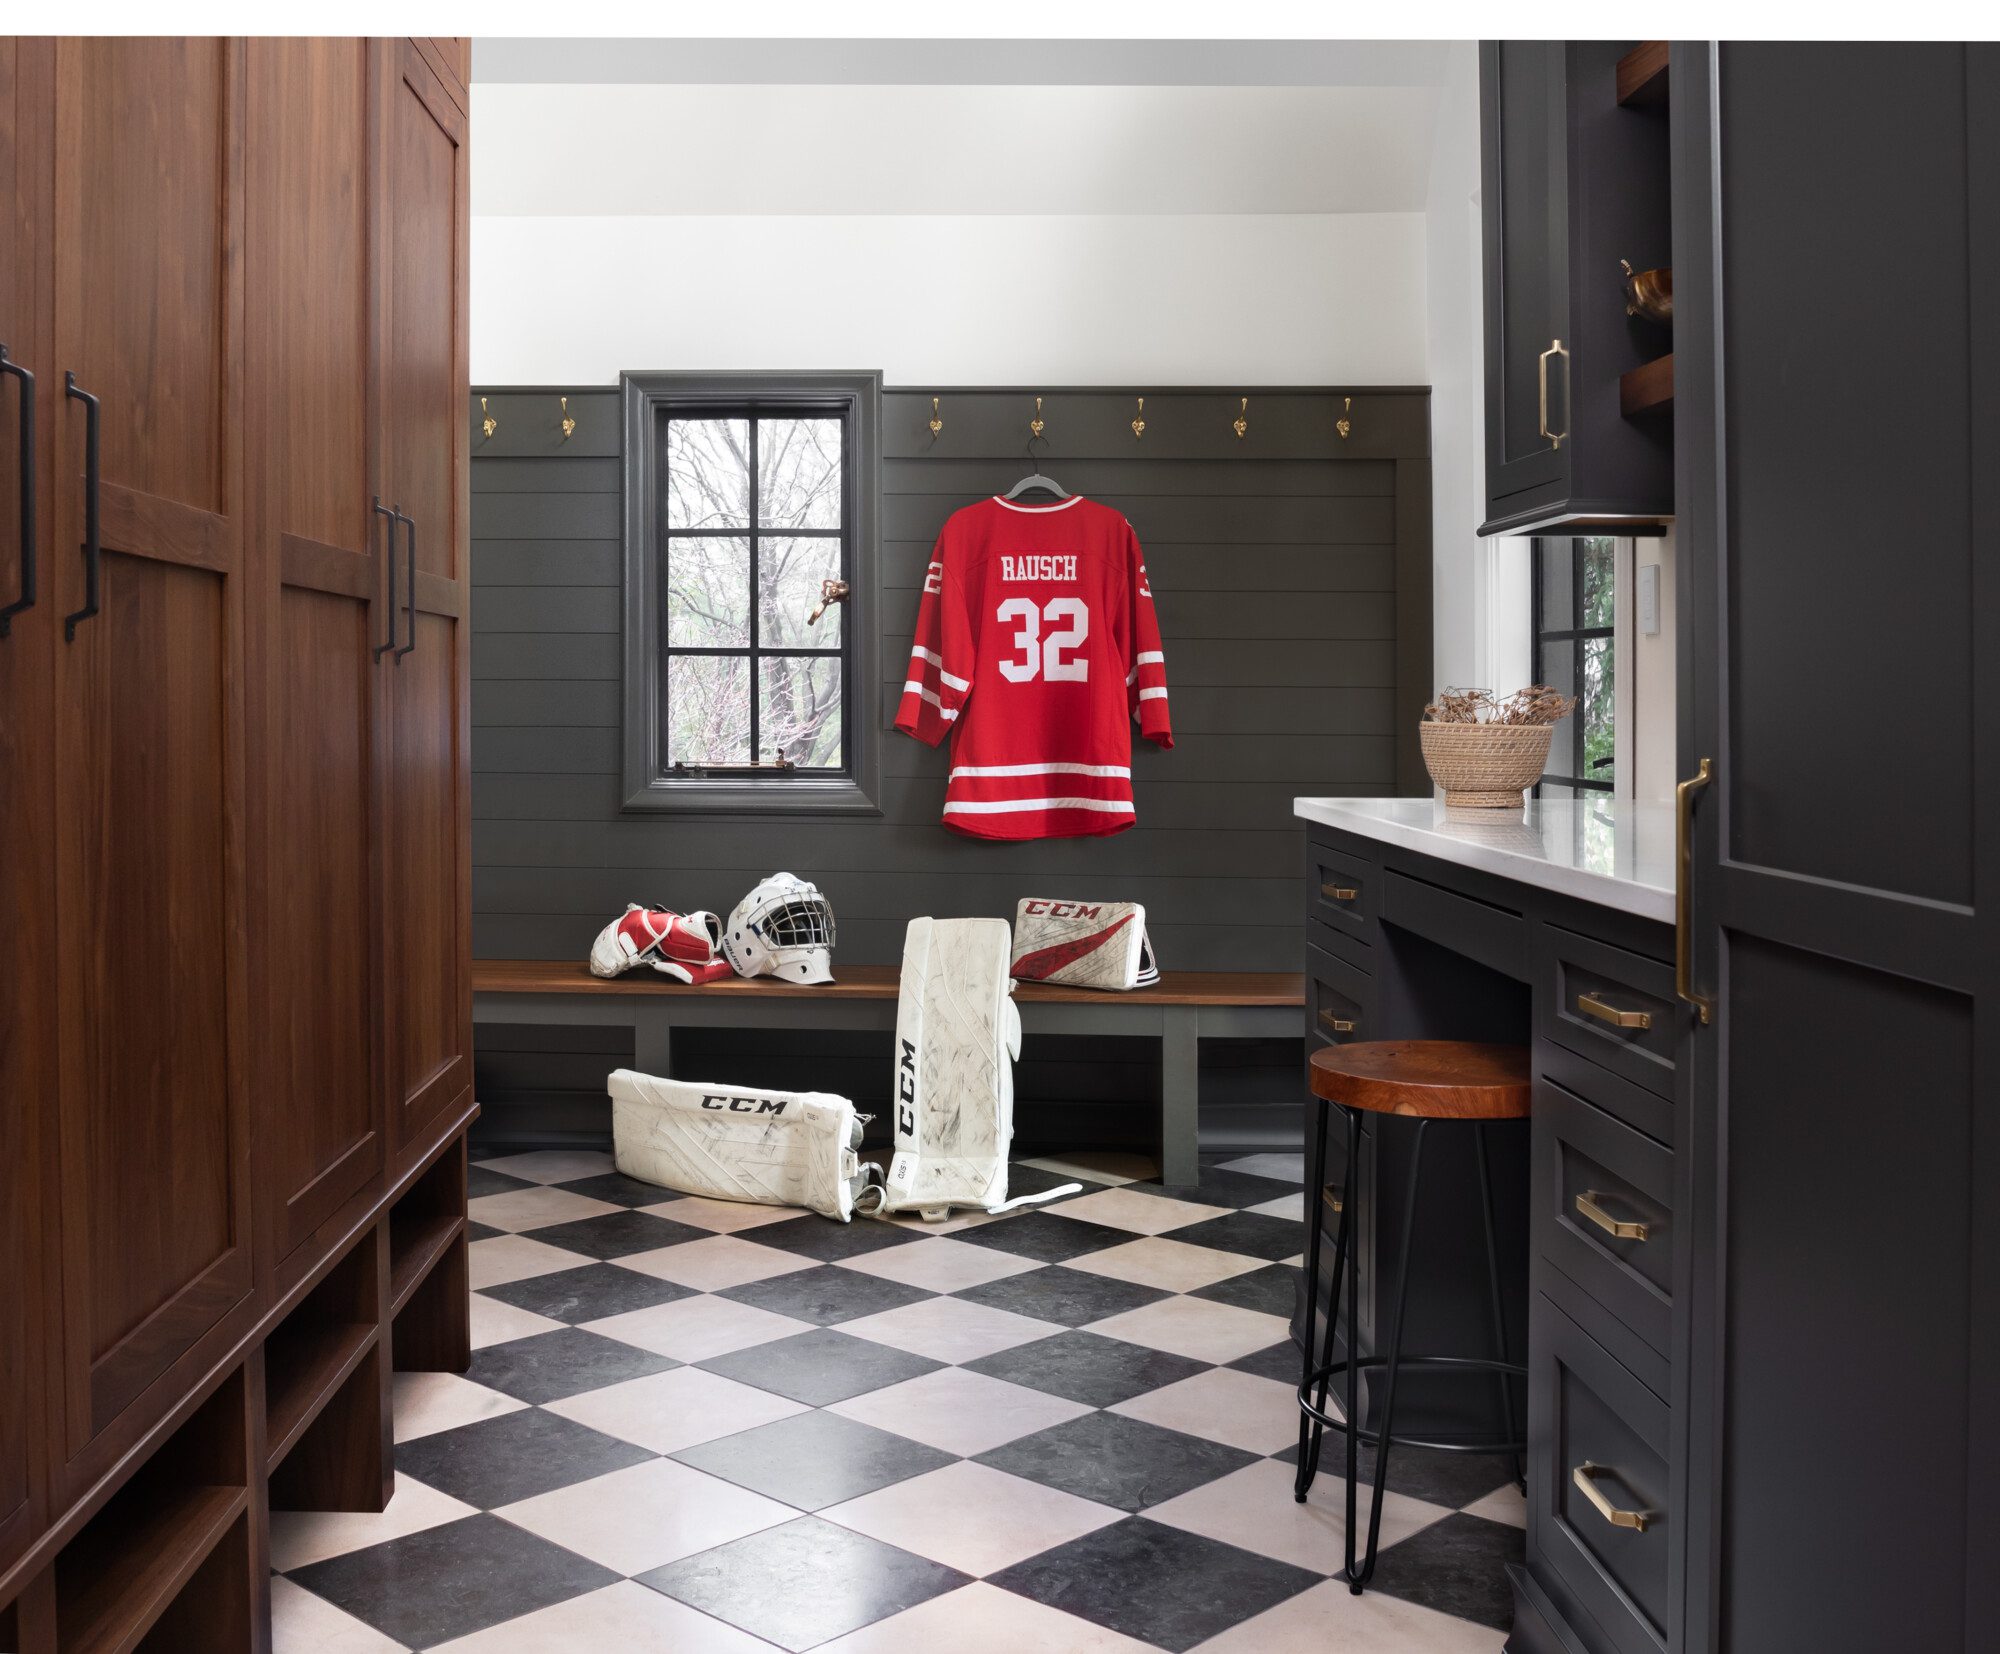 the mudroom of hockey players